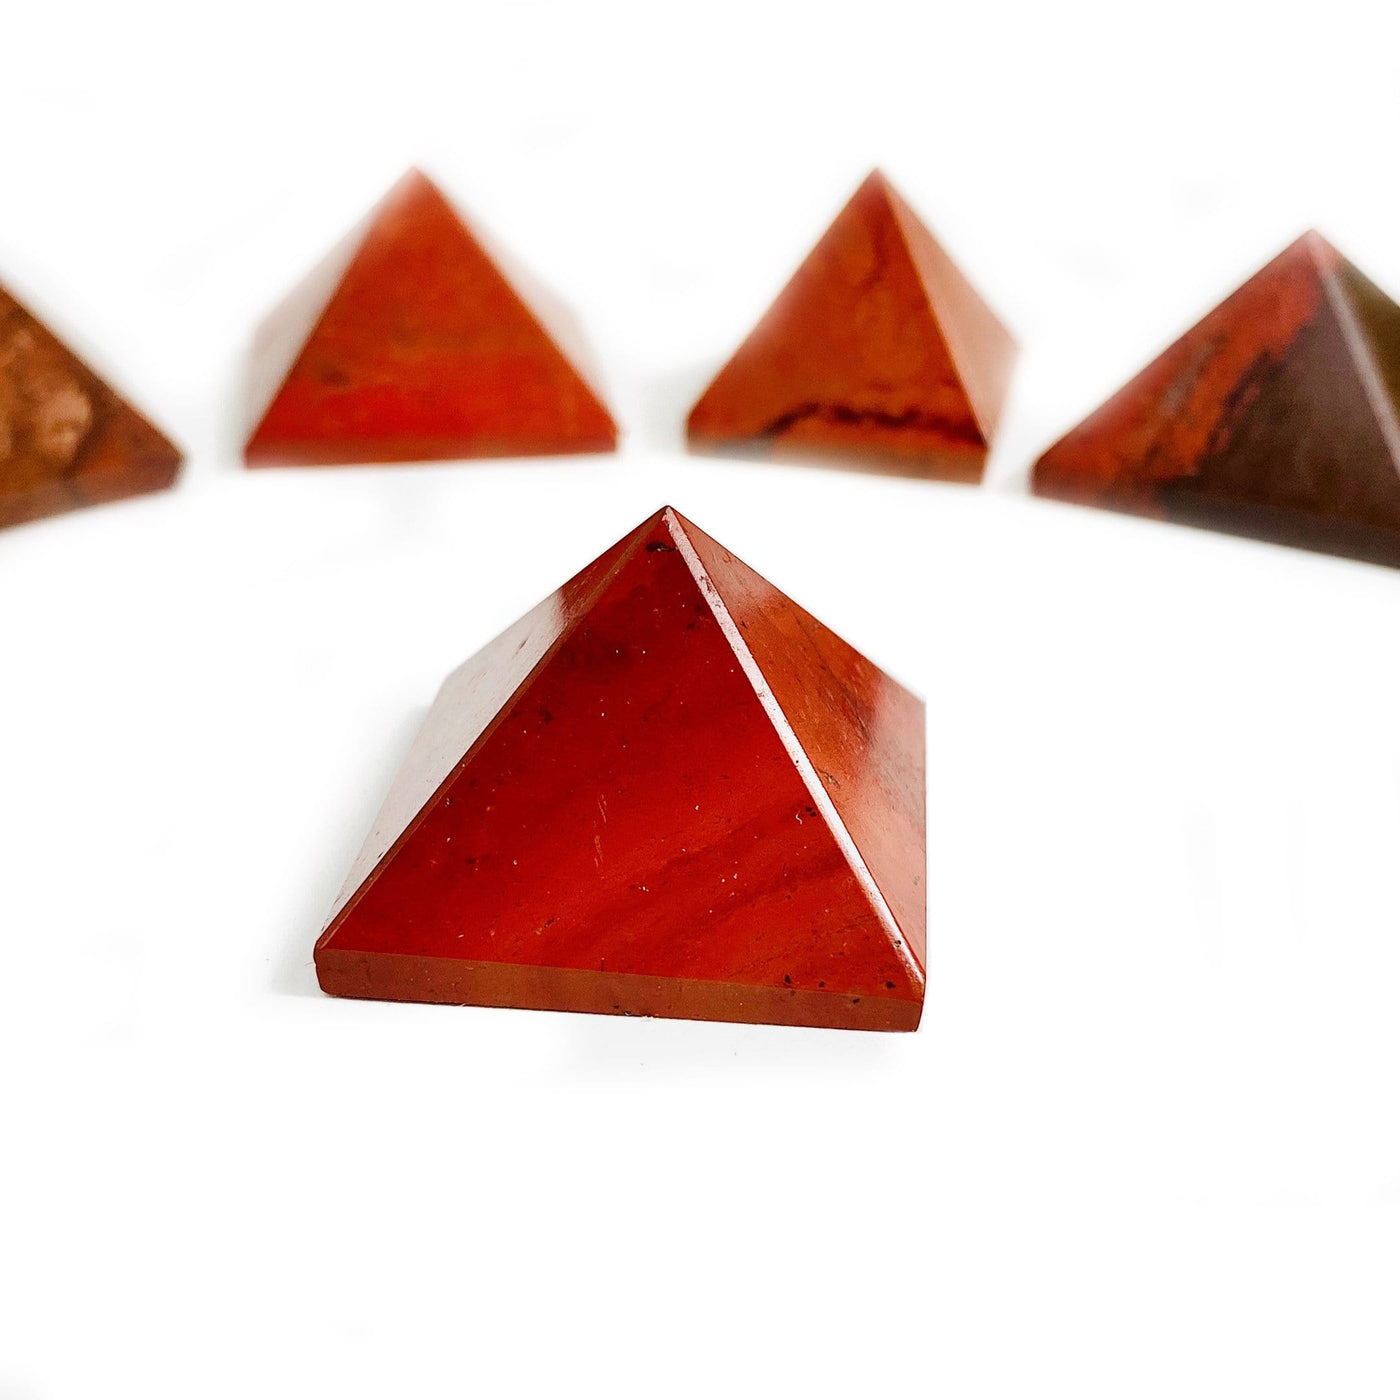 1 Red Jasper Pyramid up close with 4 others blurred on white background